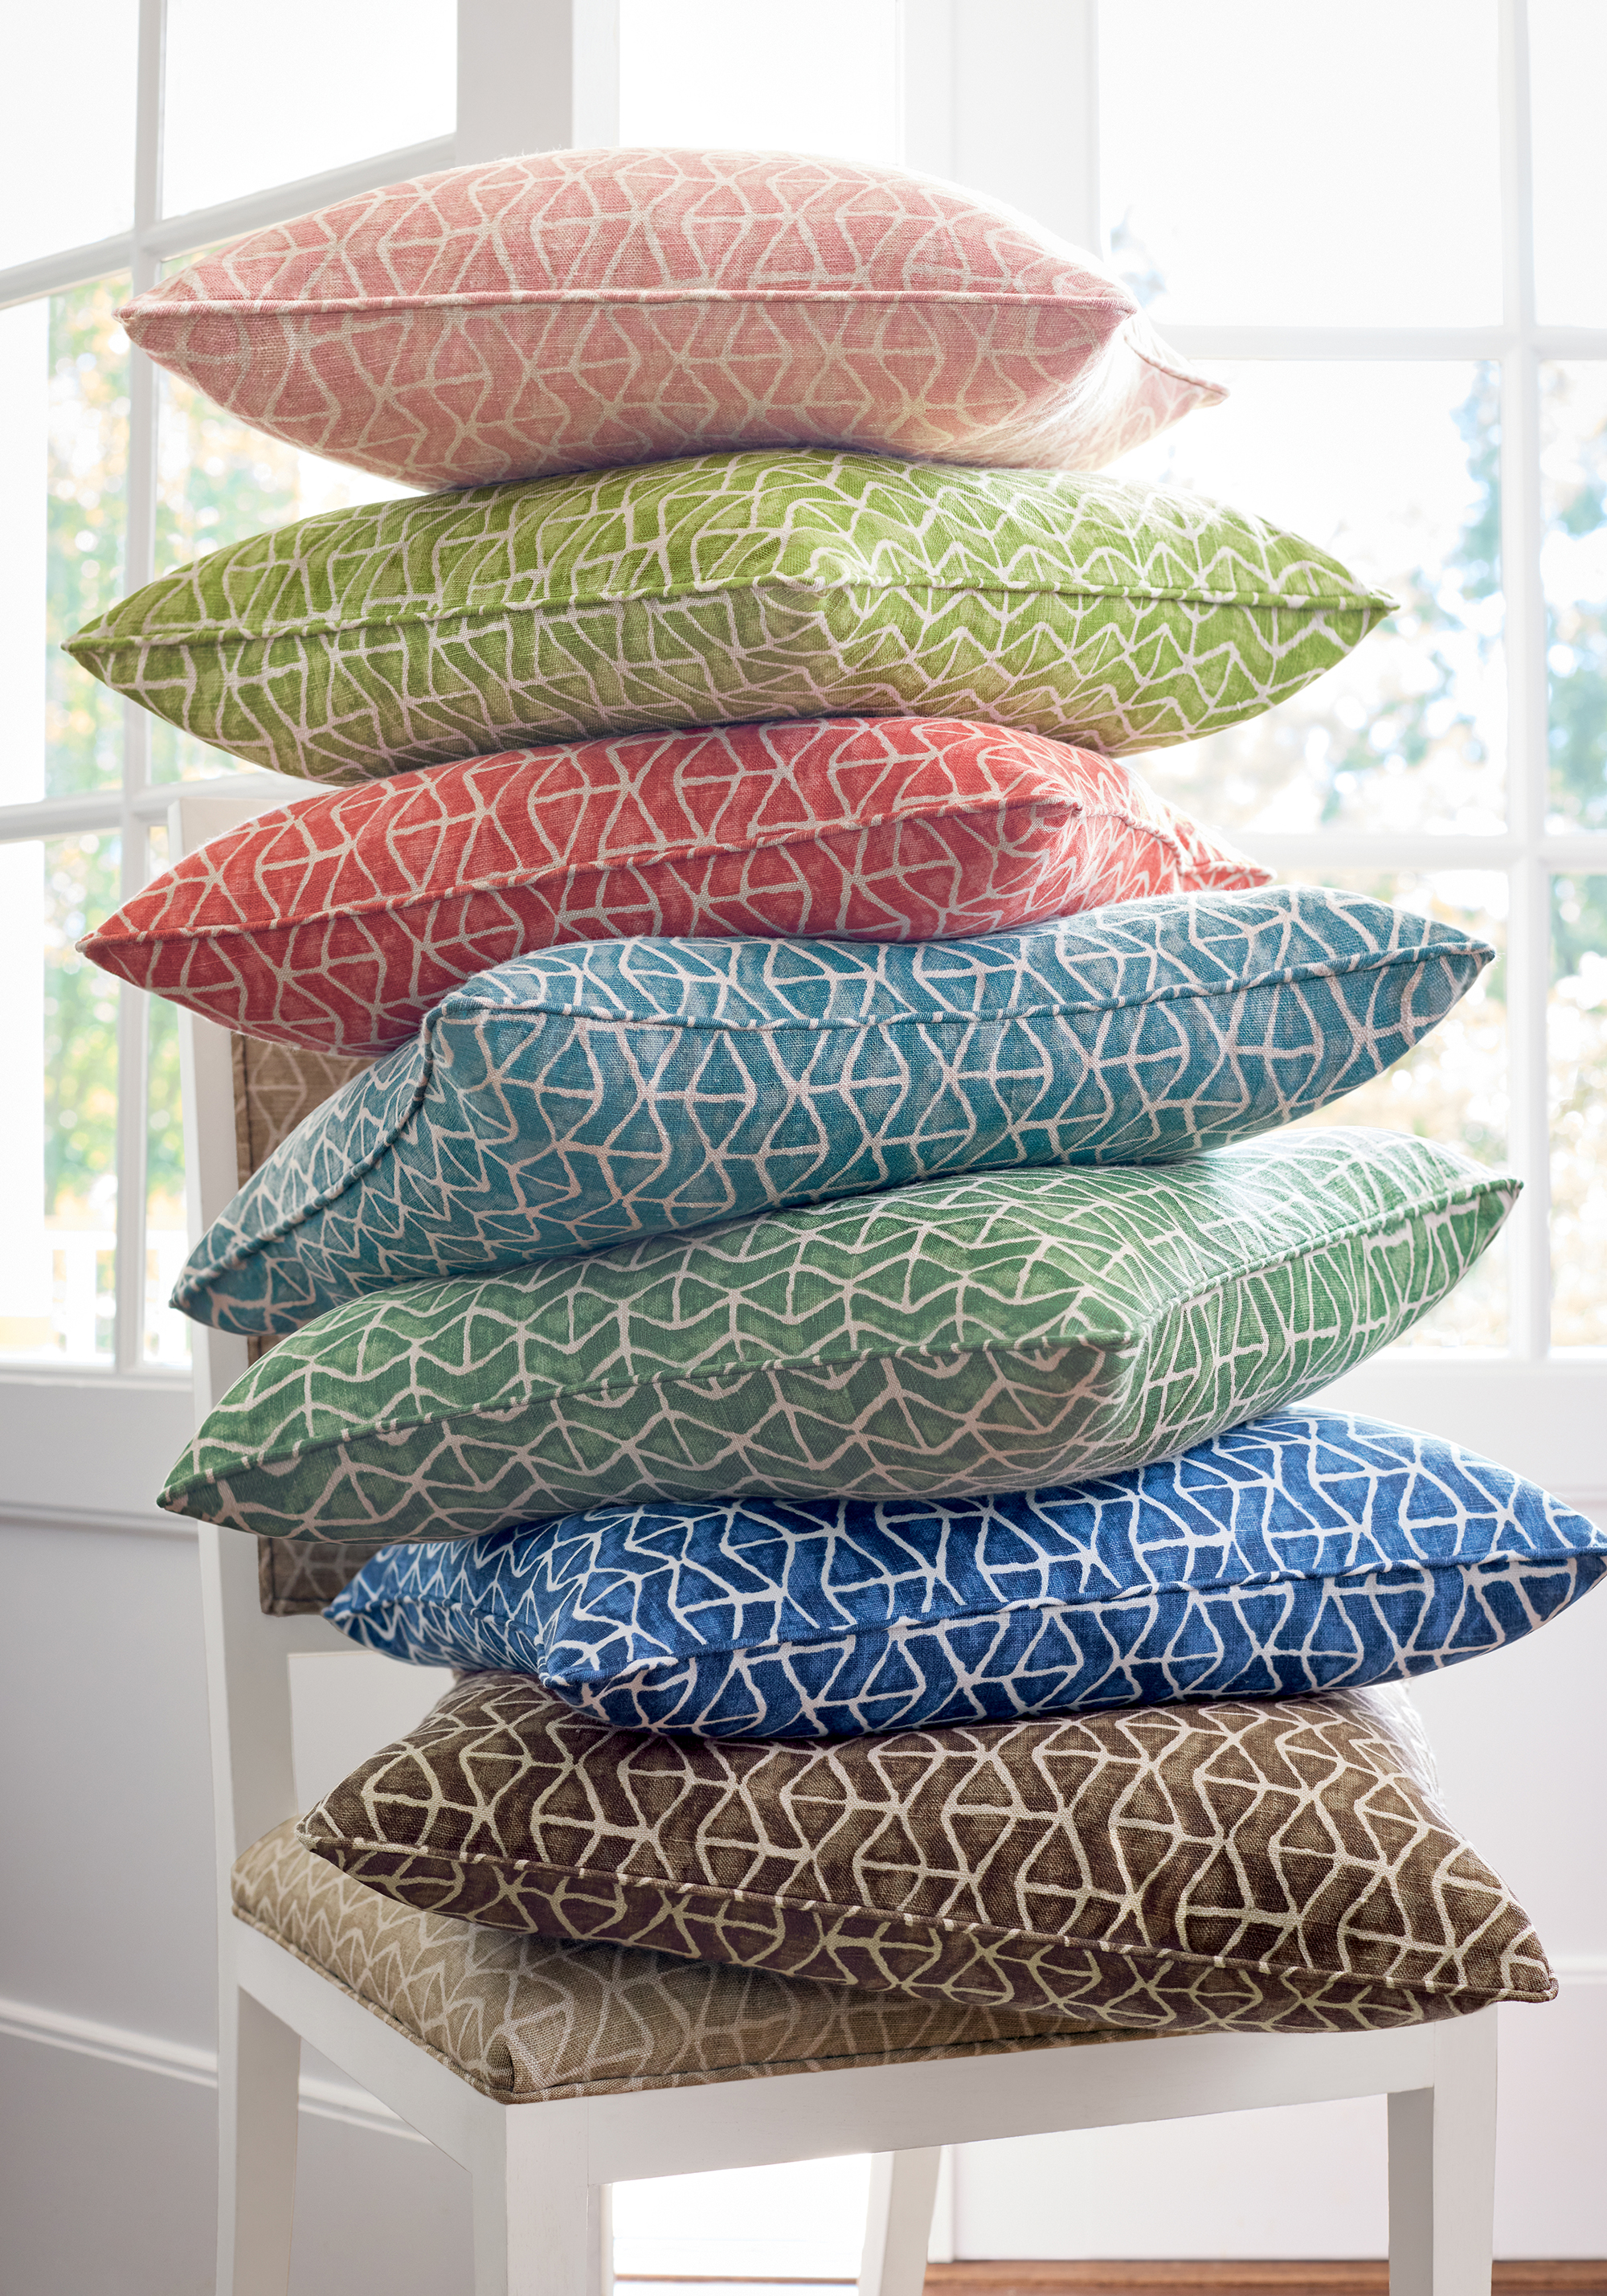 Thibaut Design Stony Brook Color Series in Sojourn